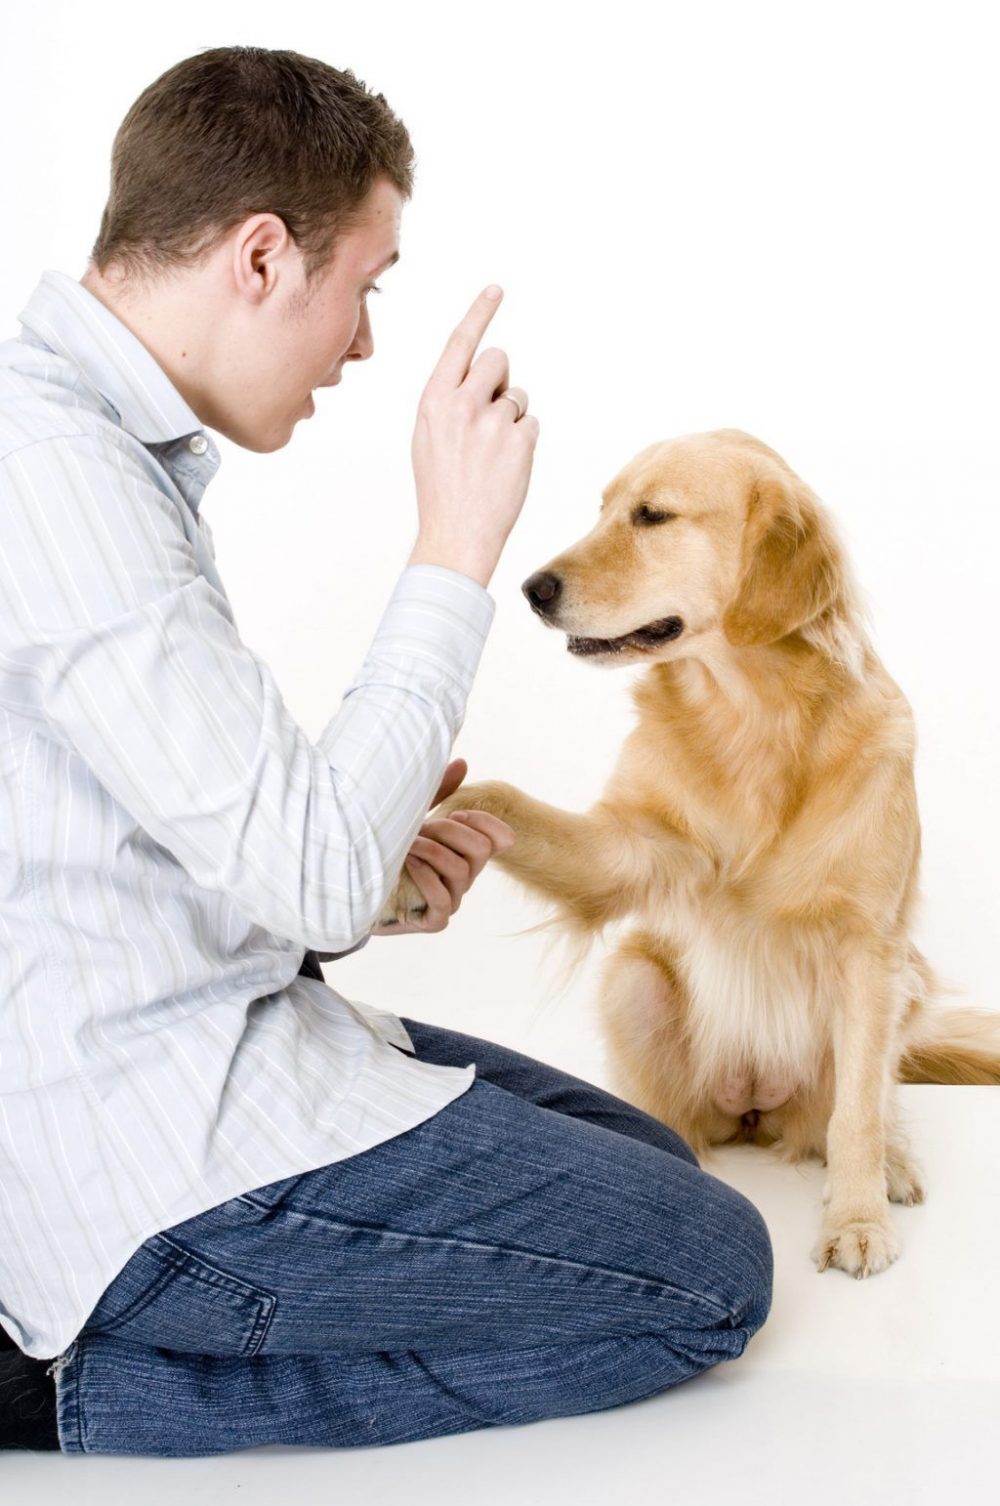 Clicker Training Dogs: Benefits & Tips